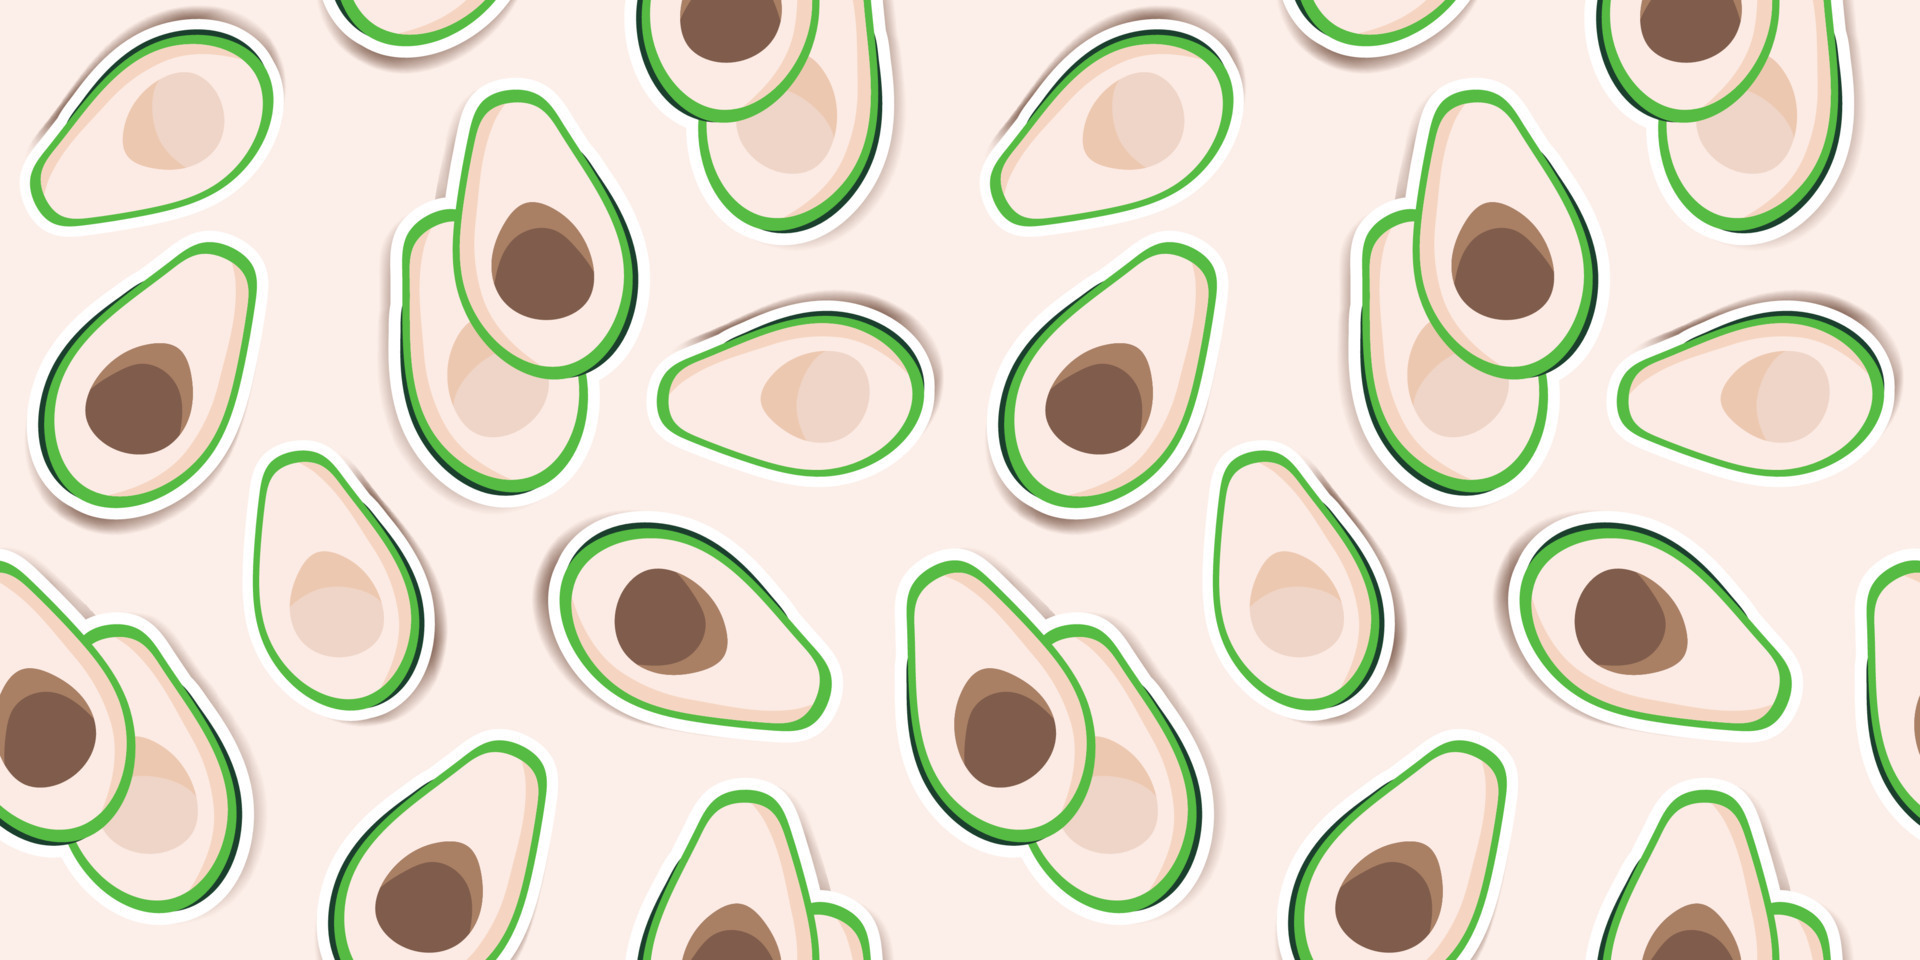 A colorful pattern of avocado stickers on a light pink background - Avocado, fruit